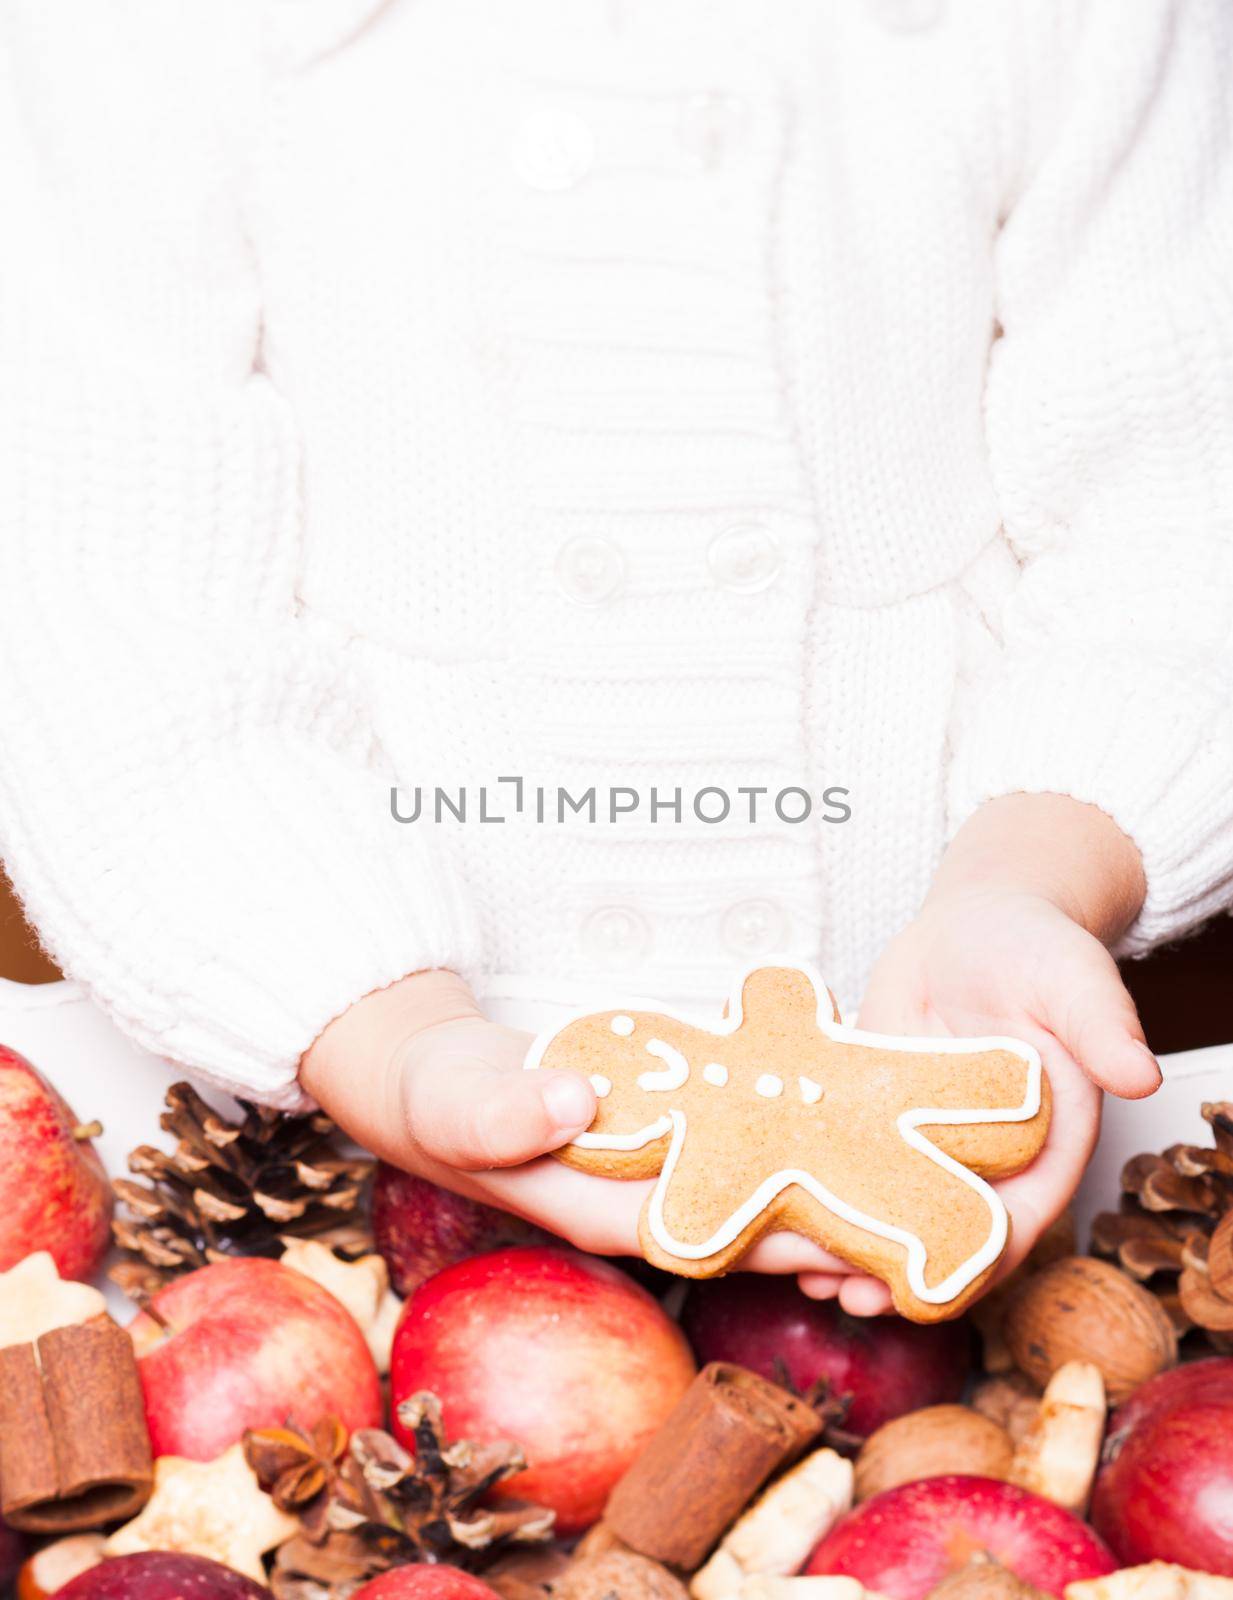 Child's hands hold a red apple and gingerman cookie